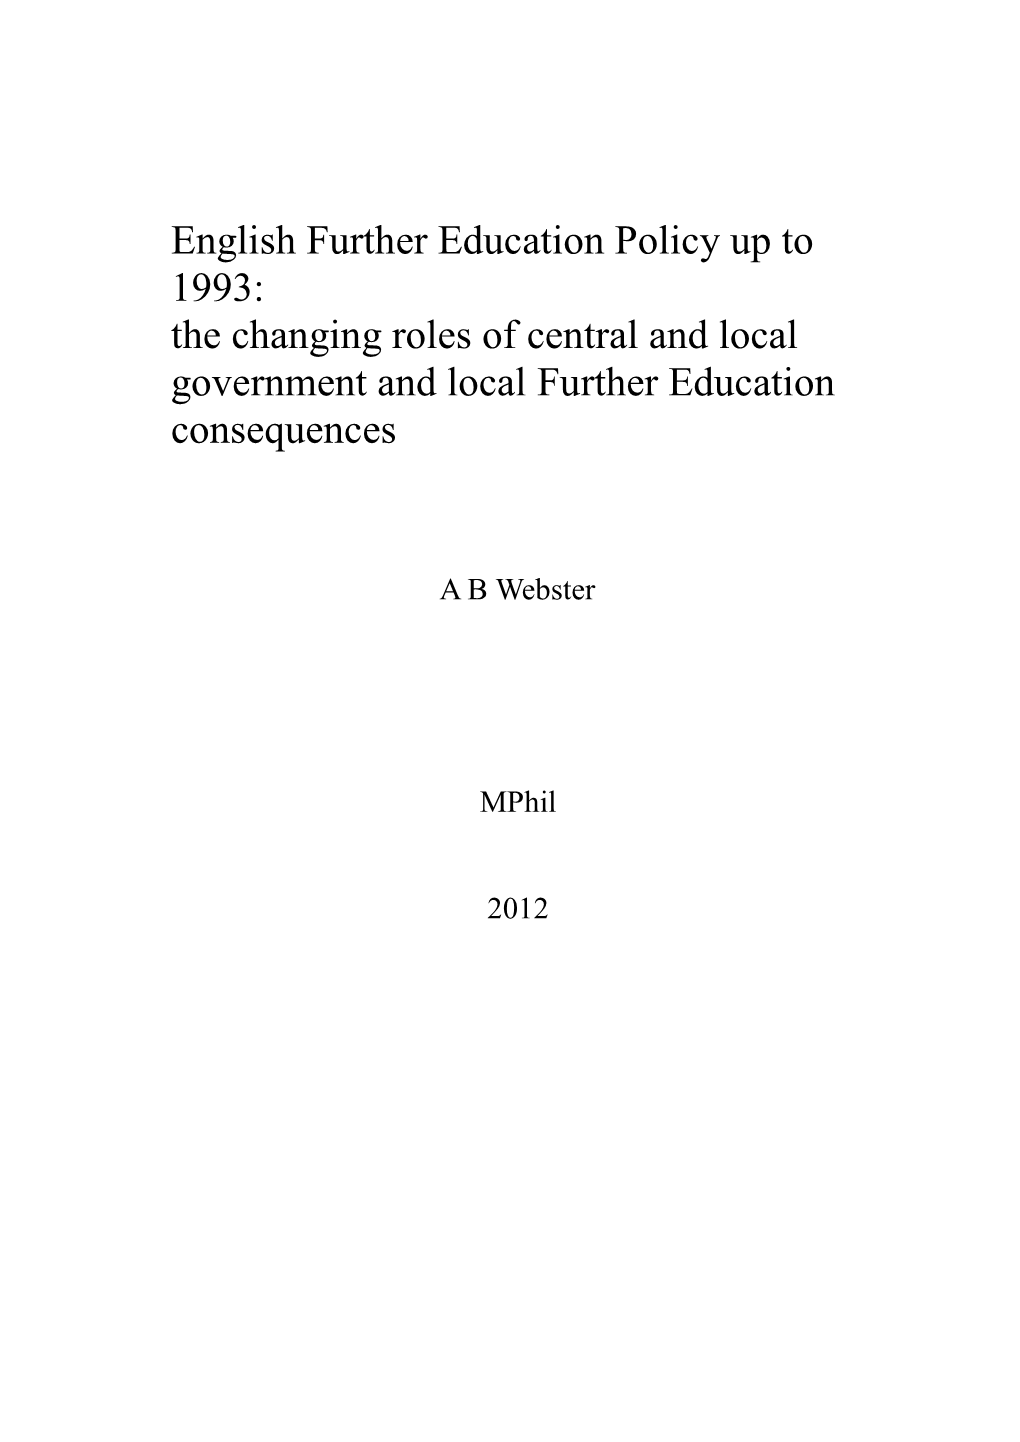 English Further Education Policy up to 1993: the Changing Roles of Central and Local Government and Local Further Education Consequences